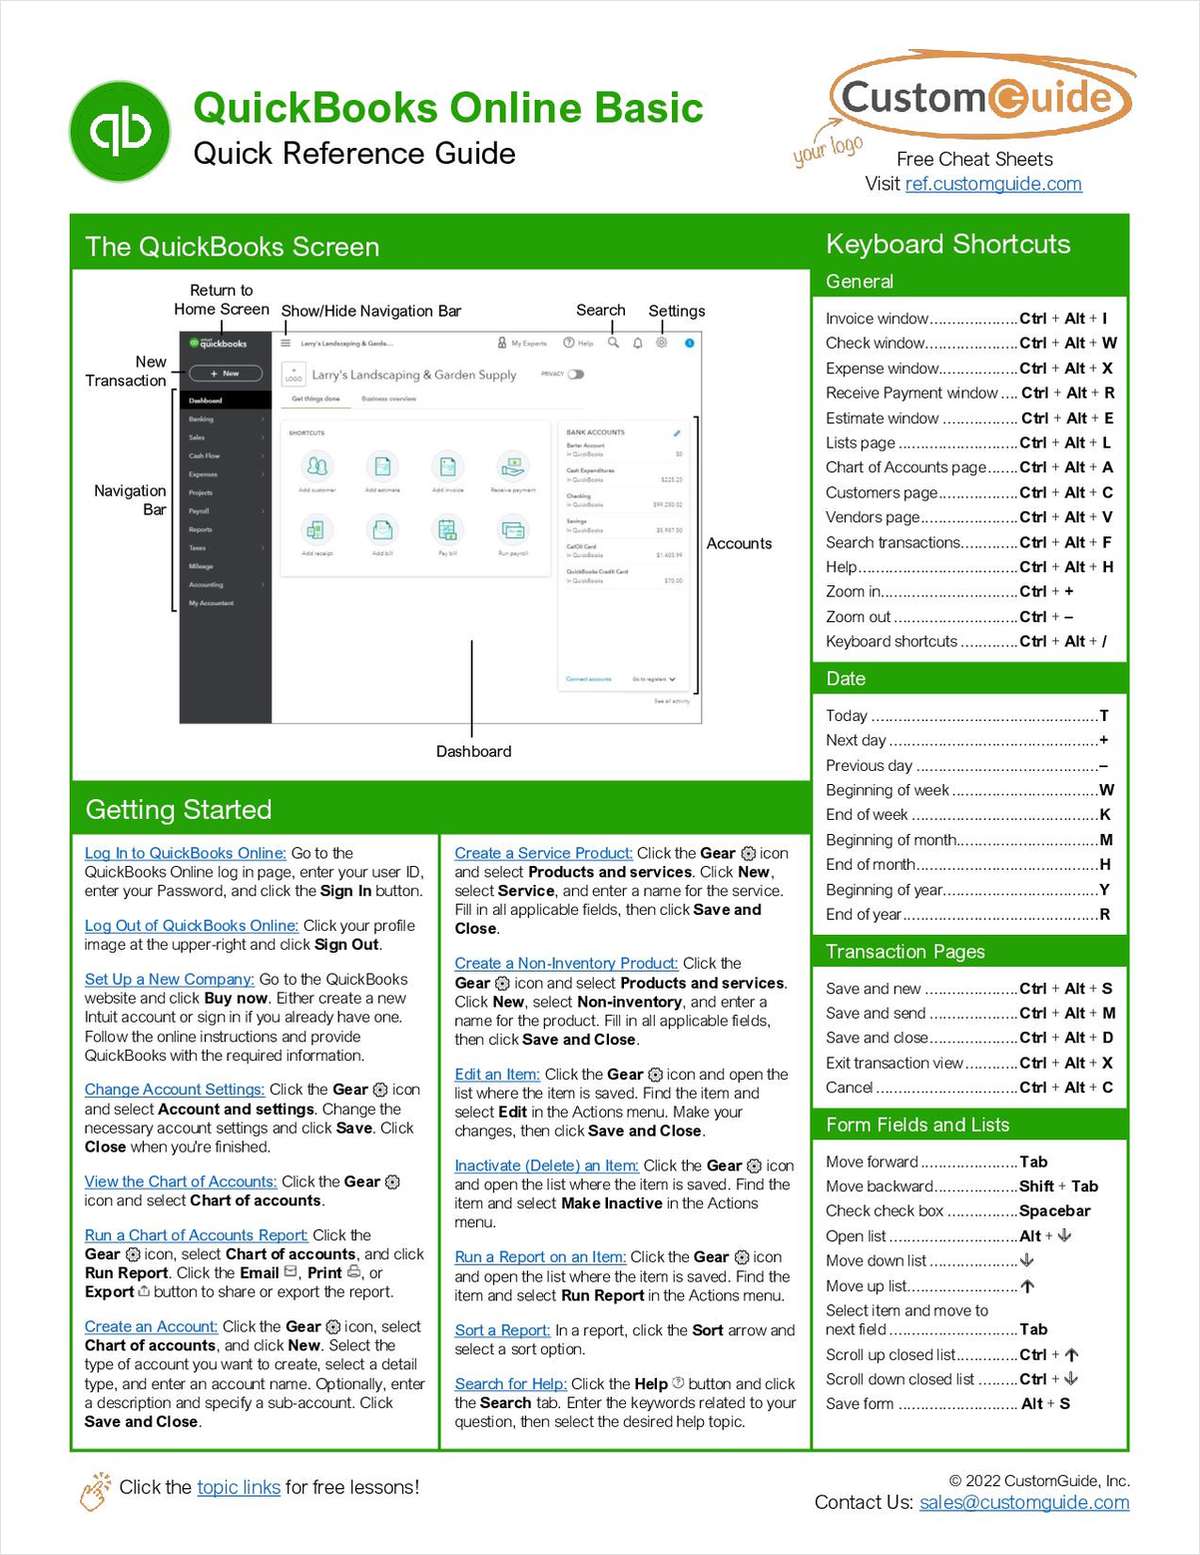 w cusb154c8 - Quickbooks Quick Reference Guide